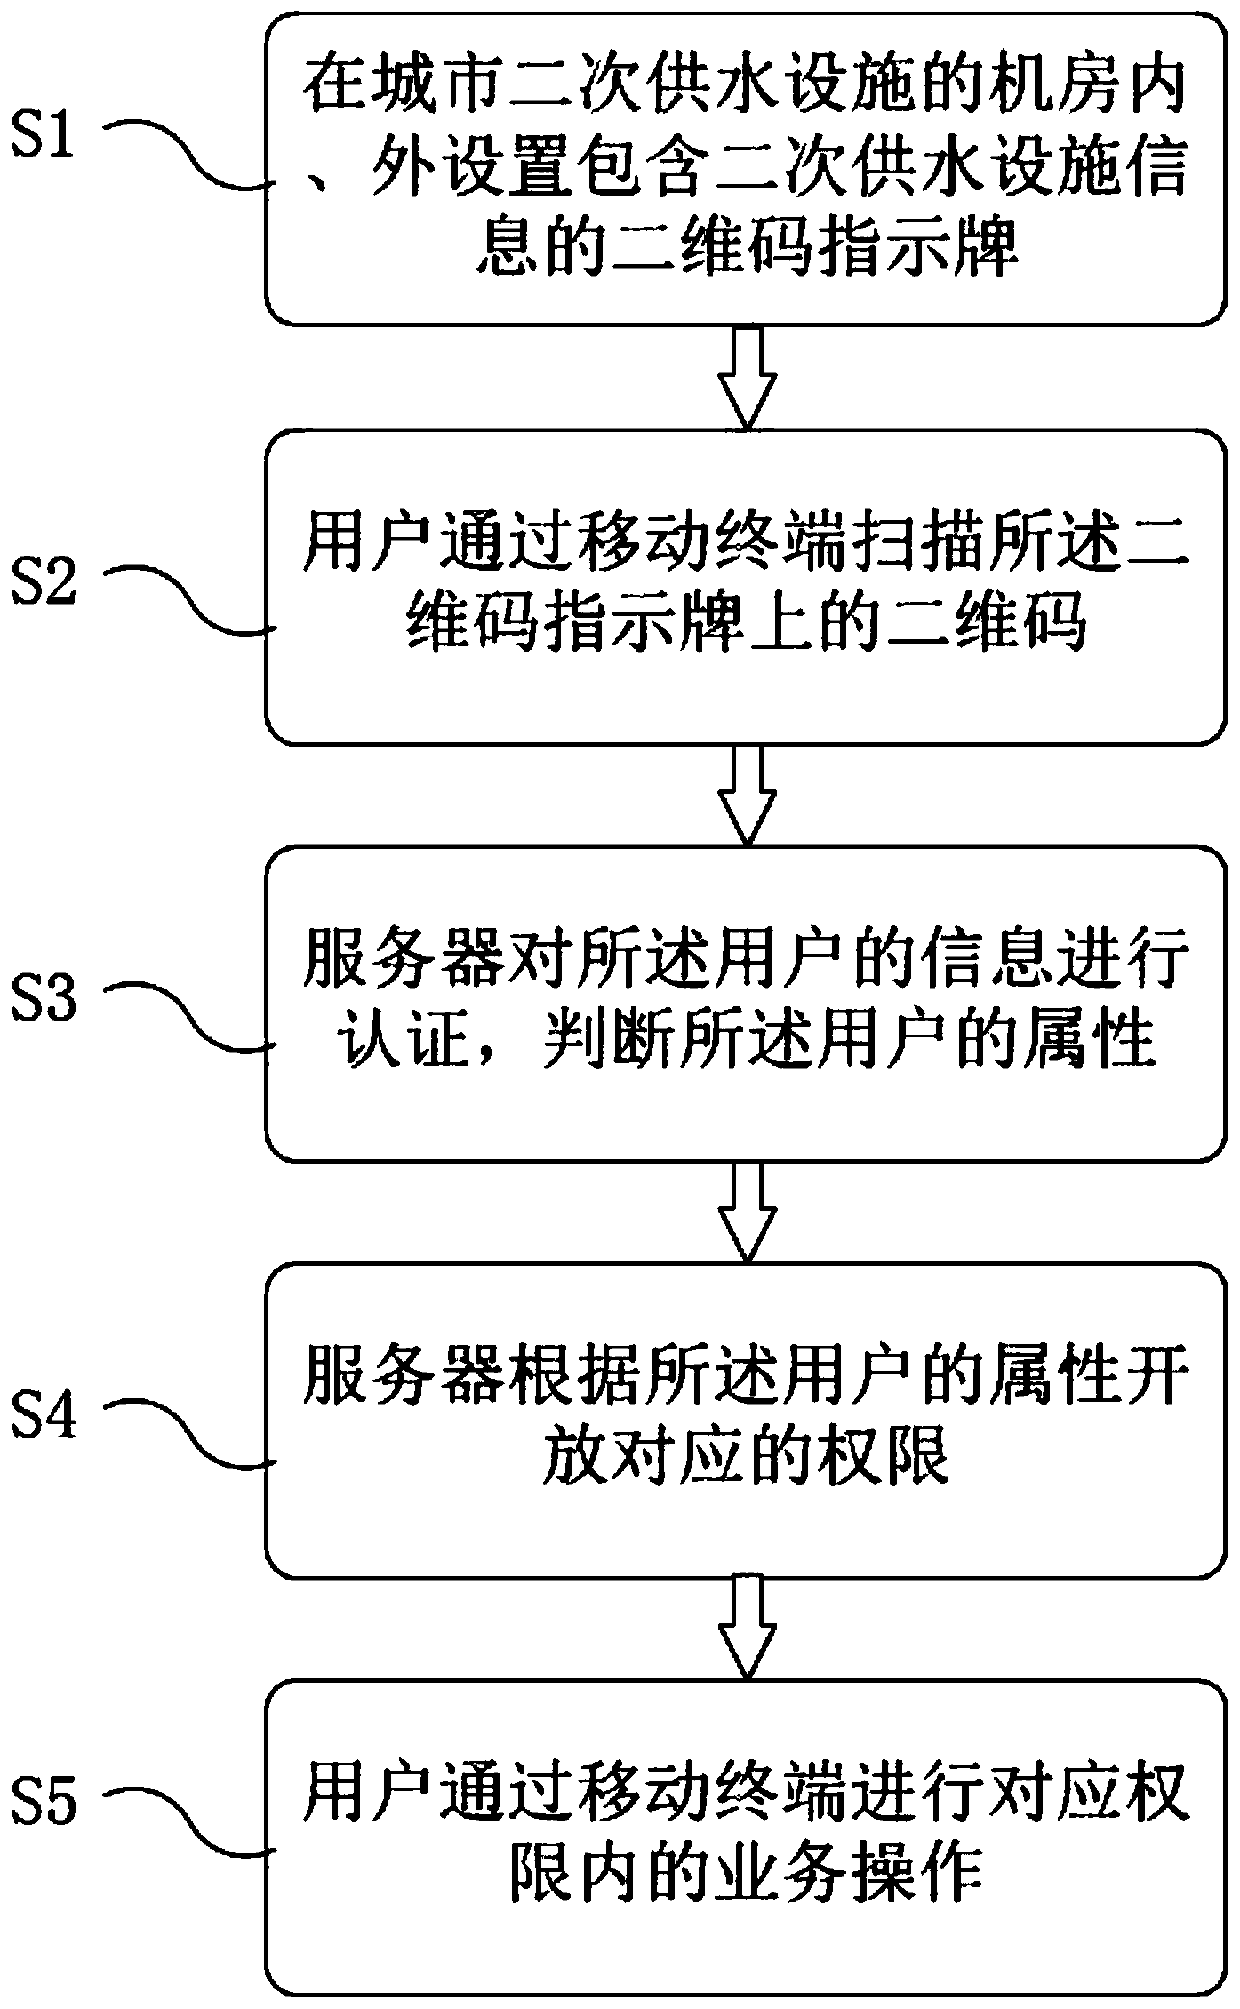 Urban secondary water supply facility management method and system based on a two-dimensional code